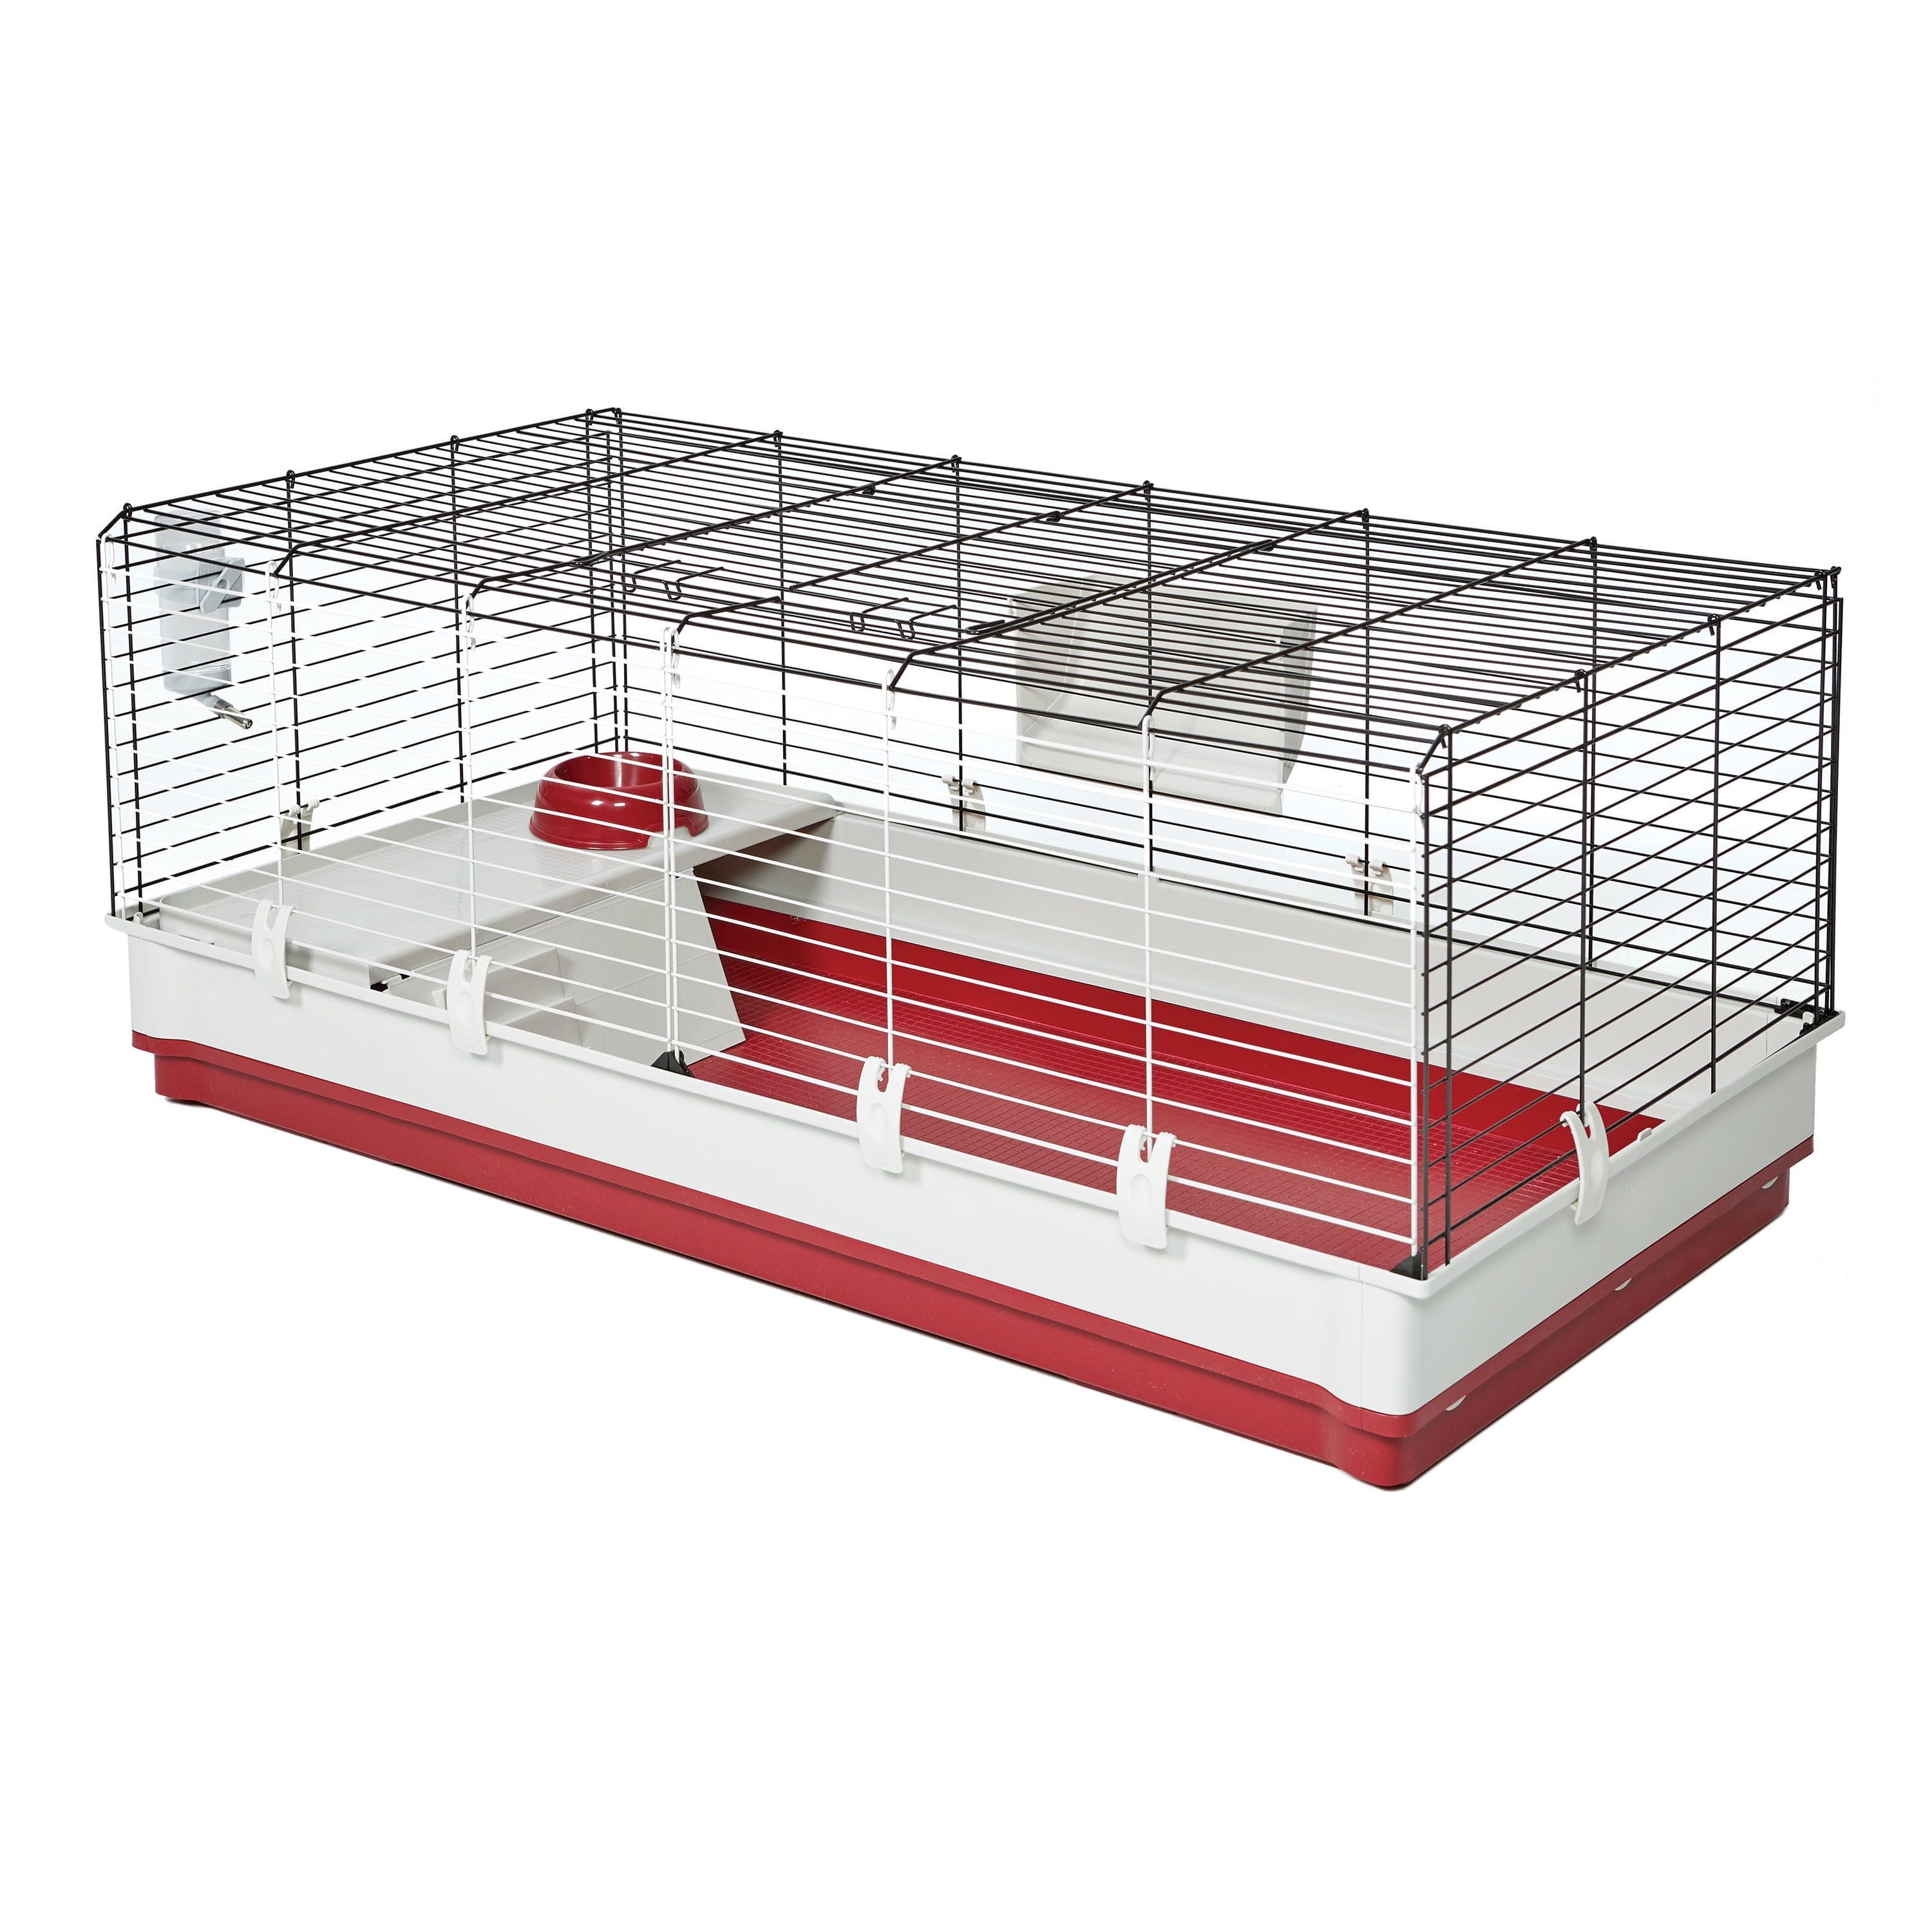 Guinea Pig Cage Expandable Pet Animal Habitat Small Critter Play Exercise NEW 